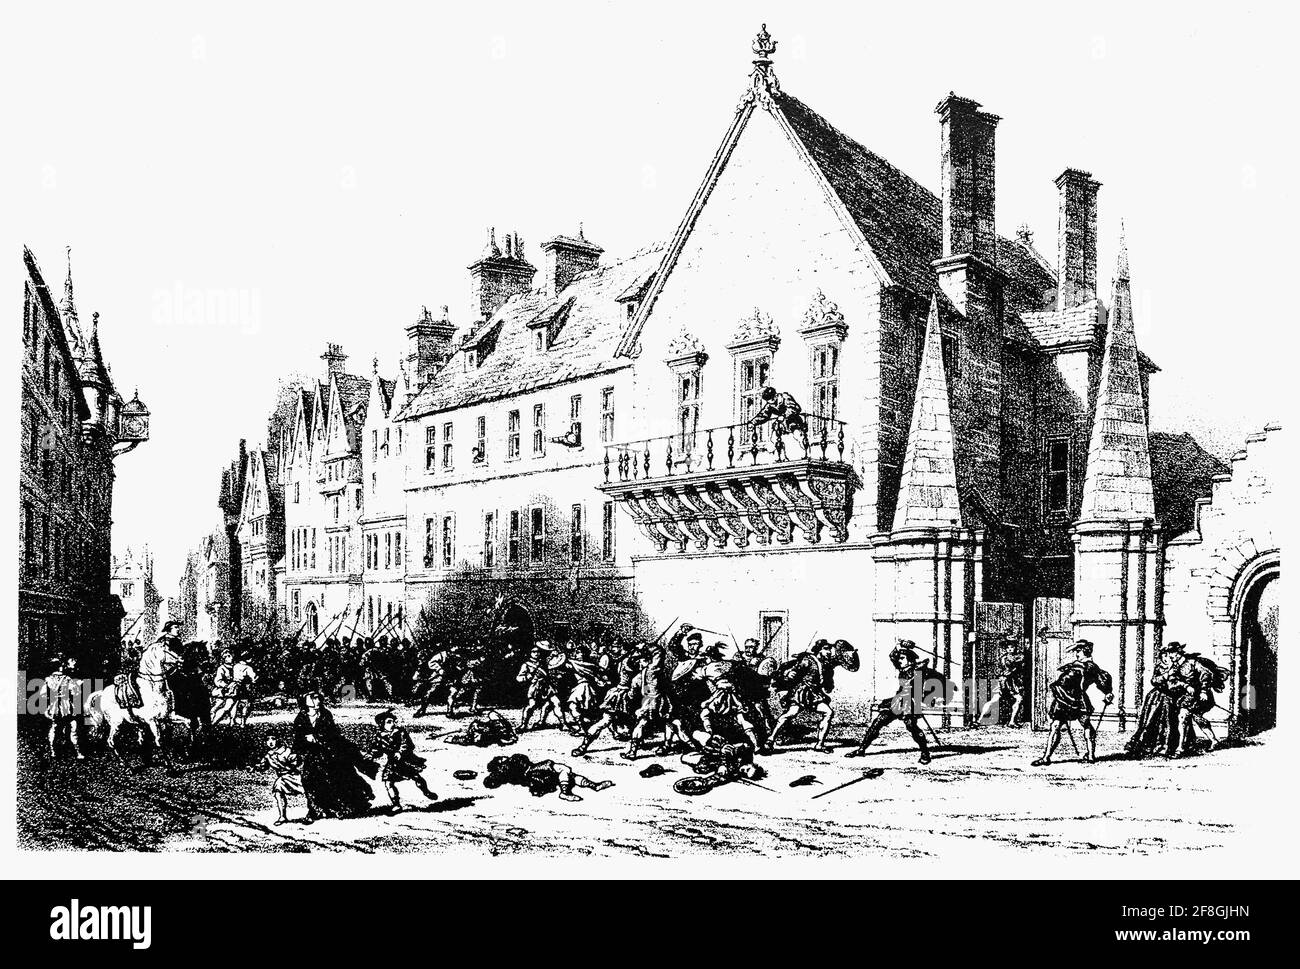 A street fight outside Moray House in the Canongate, Edinburgh  shortly after it was built in 1625. King James I supposedly remarked on the Scots fondness for a fight. At the time the Canongate with open spaces was a popular place for an aristocratic townhouse. In 1643 the house passed to the Countess of Moray and the building adopted the name it still has today. Stock Photo